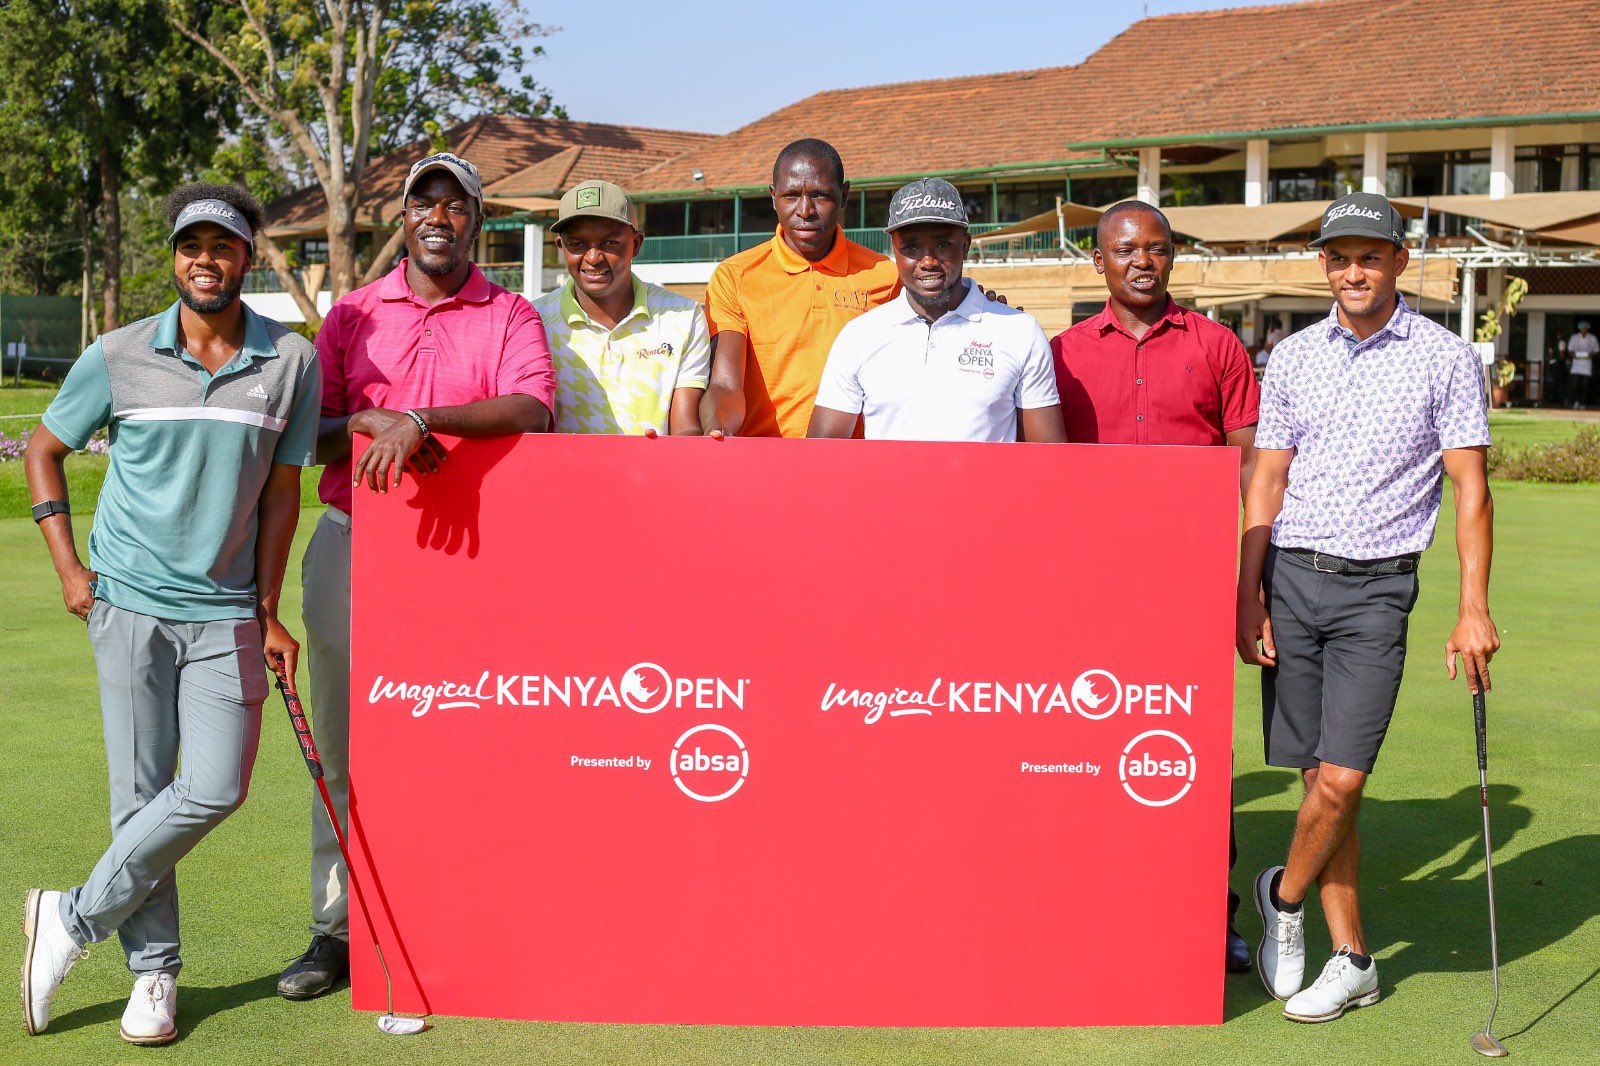 Kenya is looking to grow as an international destination for both sports and tourism